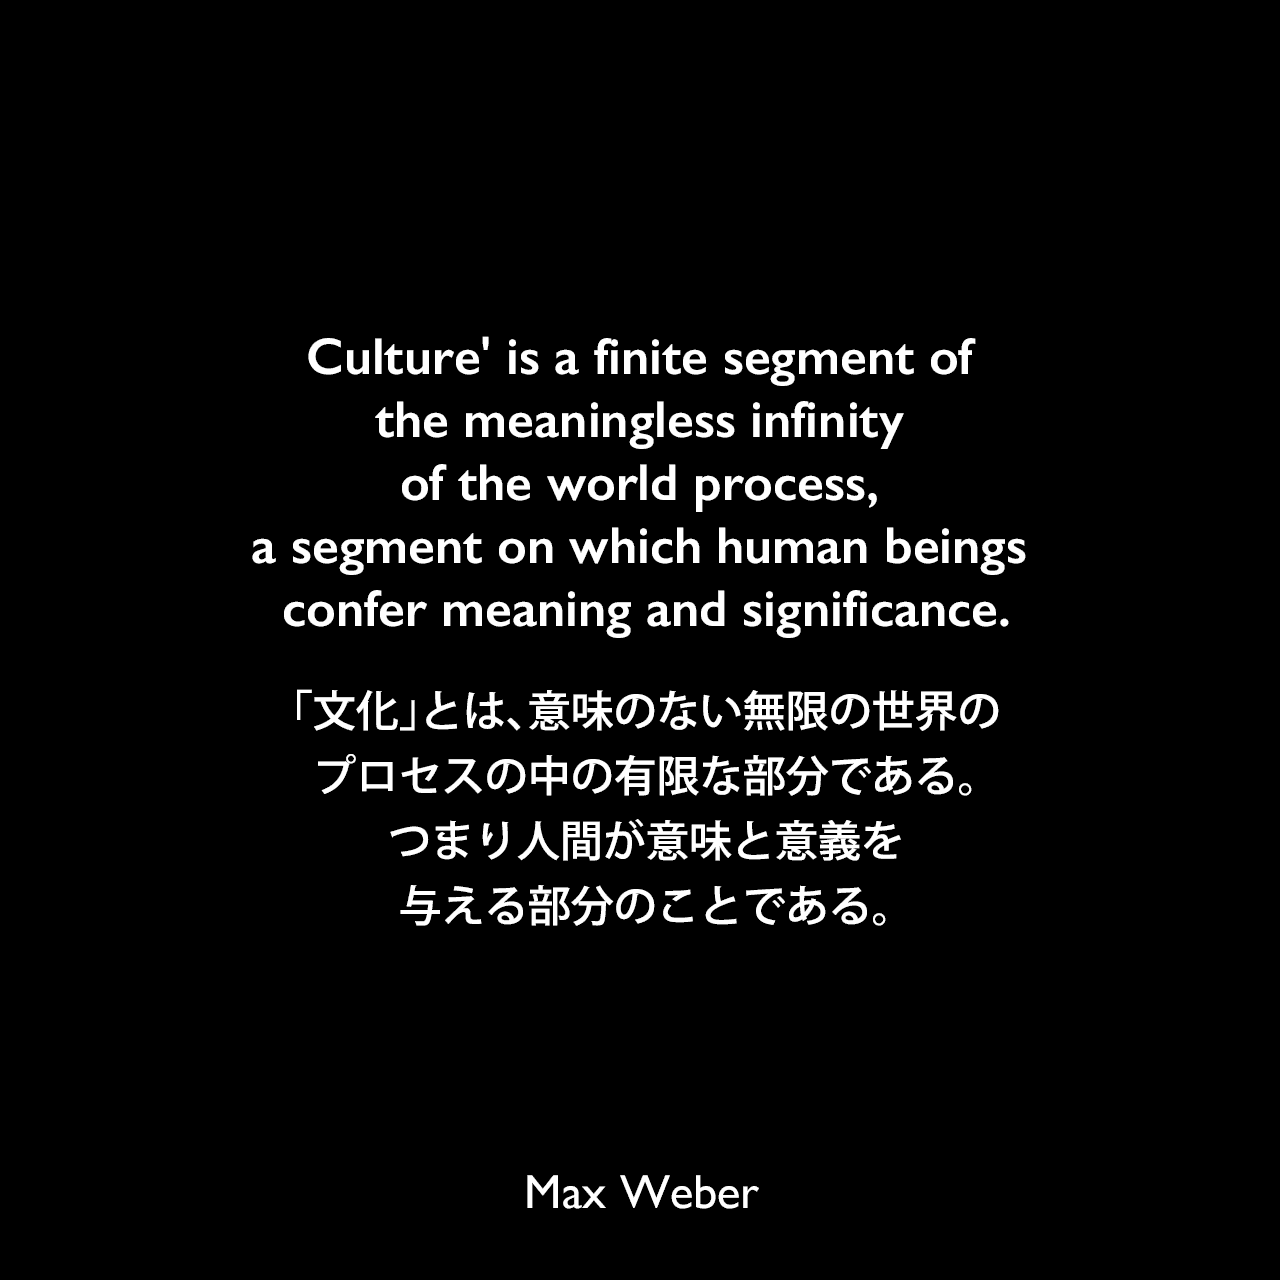 Culture' is a finite segment of the meaningless infinity of the world process, a segment on which human beings confer meaning and significance.「文化」とは、意味のない無限の世界のプロセスの中の有限な部分である。つまり人間が意味と意義を与える部分のことである。Max Weber